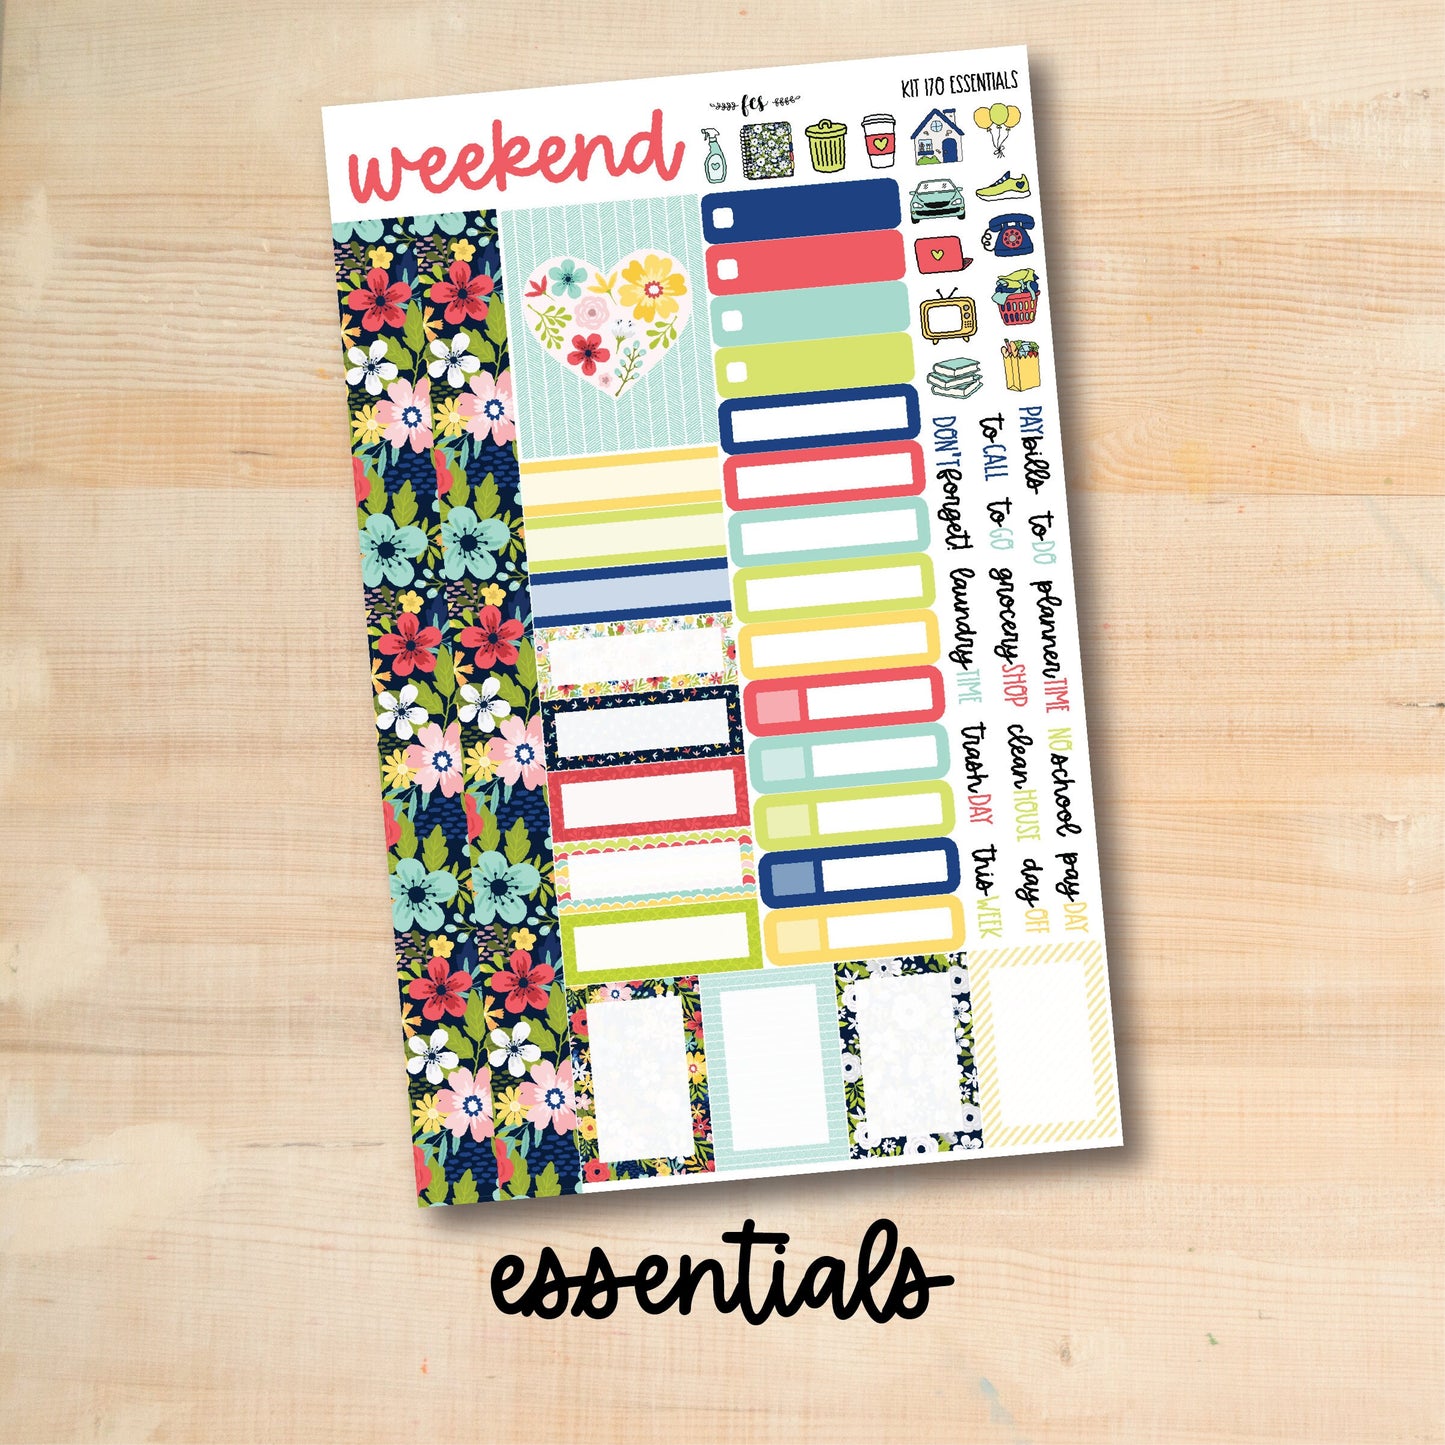 KIT-170 || HAPPY SUMMER weekly planner kit for Erin Condren, Plum Paper, MakseLife and more!